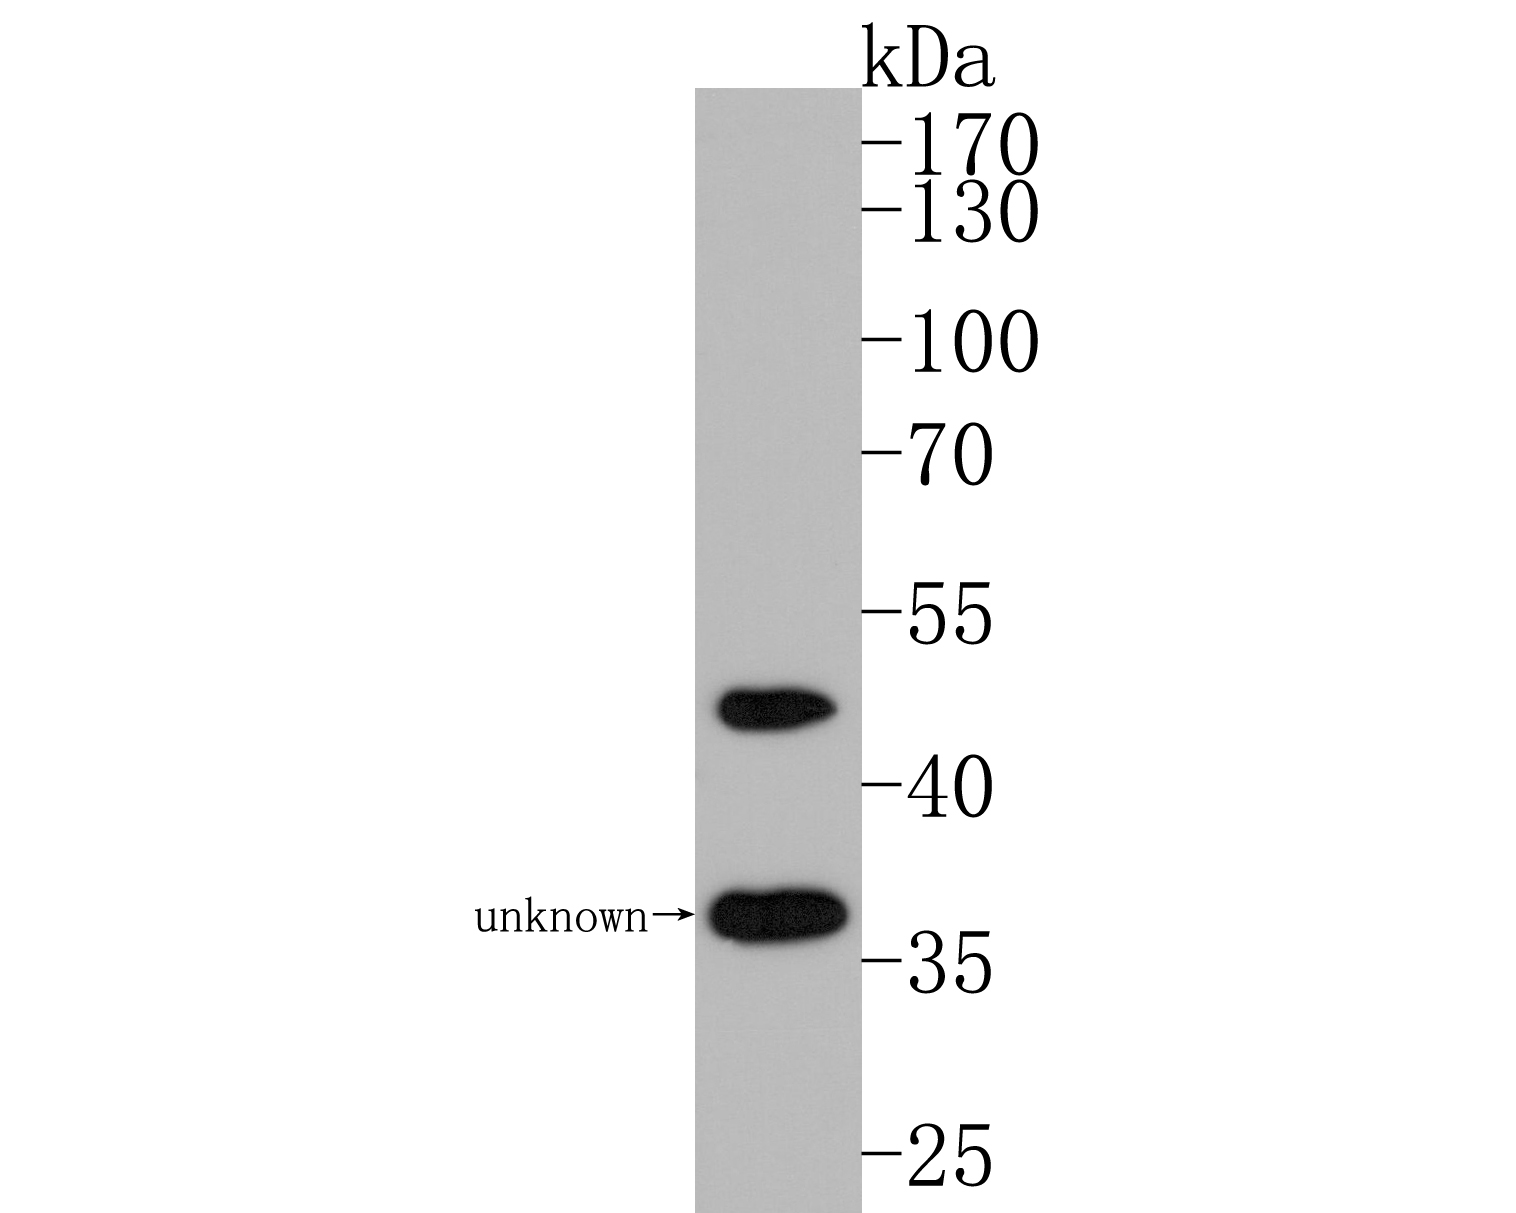 Western blot analysis of Nogo on mouse skeletal muscle tissue lysates. Proteins were transferred to a PVDF membrane and blocked with 5% BSA in PBS for 1 hour at room temperature. The primary antibody (ET1705-63, 1/500) was used in 5% BSA at room temperature for 2 hours. Goat Anti-Rabbit IgG - HRP Secondary Antibody (HA1001) at 1:200,000 dilution was used for 1 hour at room temperature.